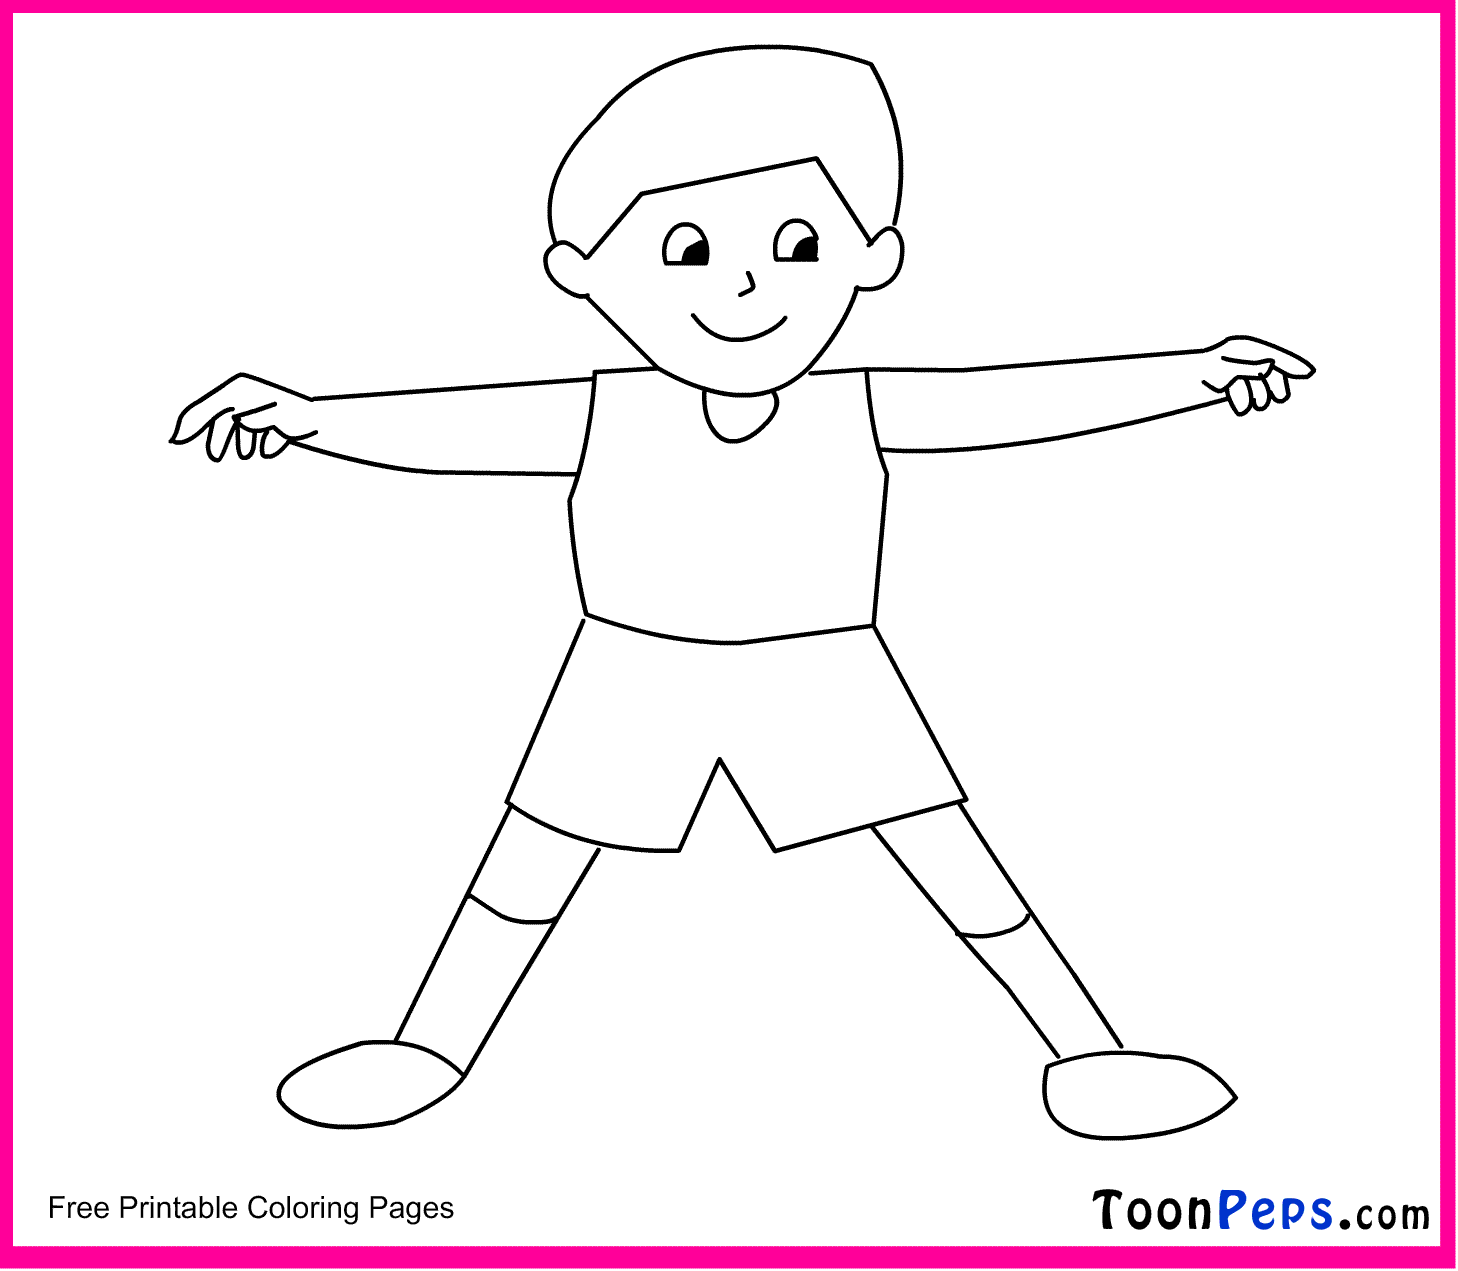 person outline coloring page